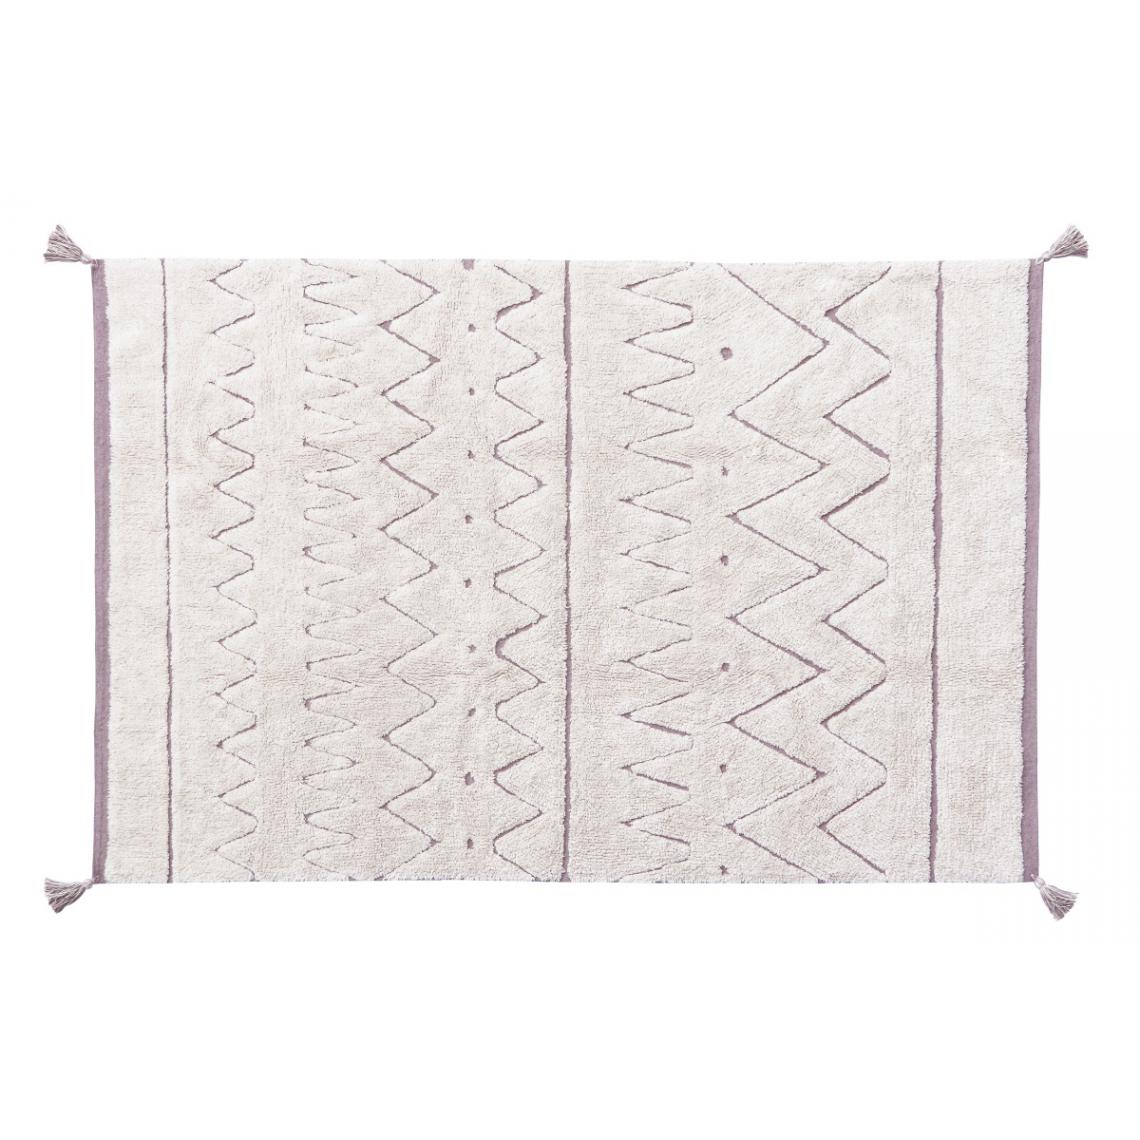 Lorena Canals - Tapis lavable RugCycled Azteca - Tapis